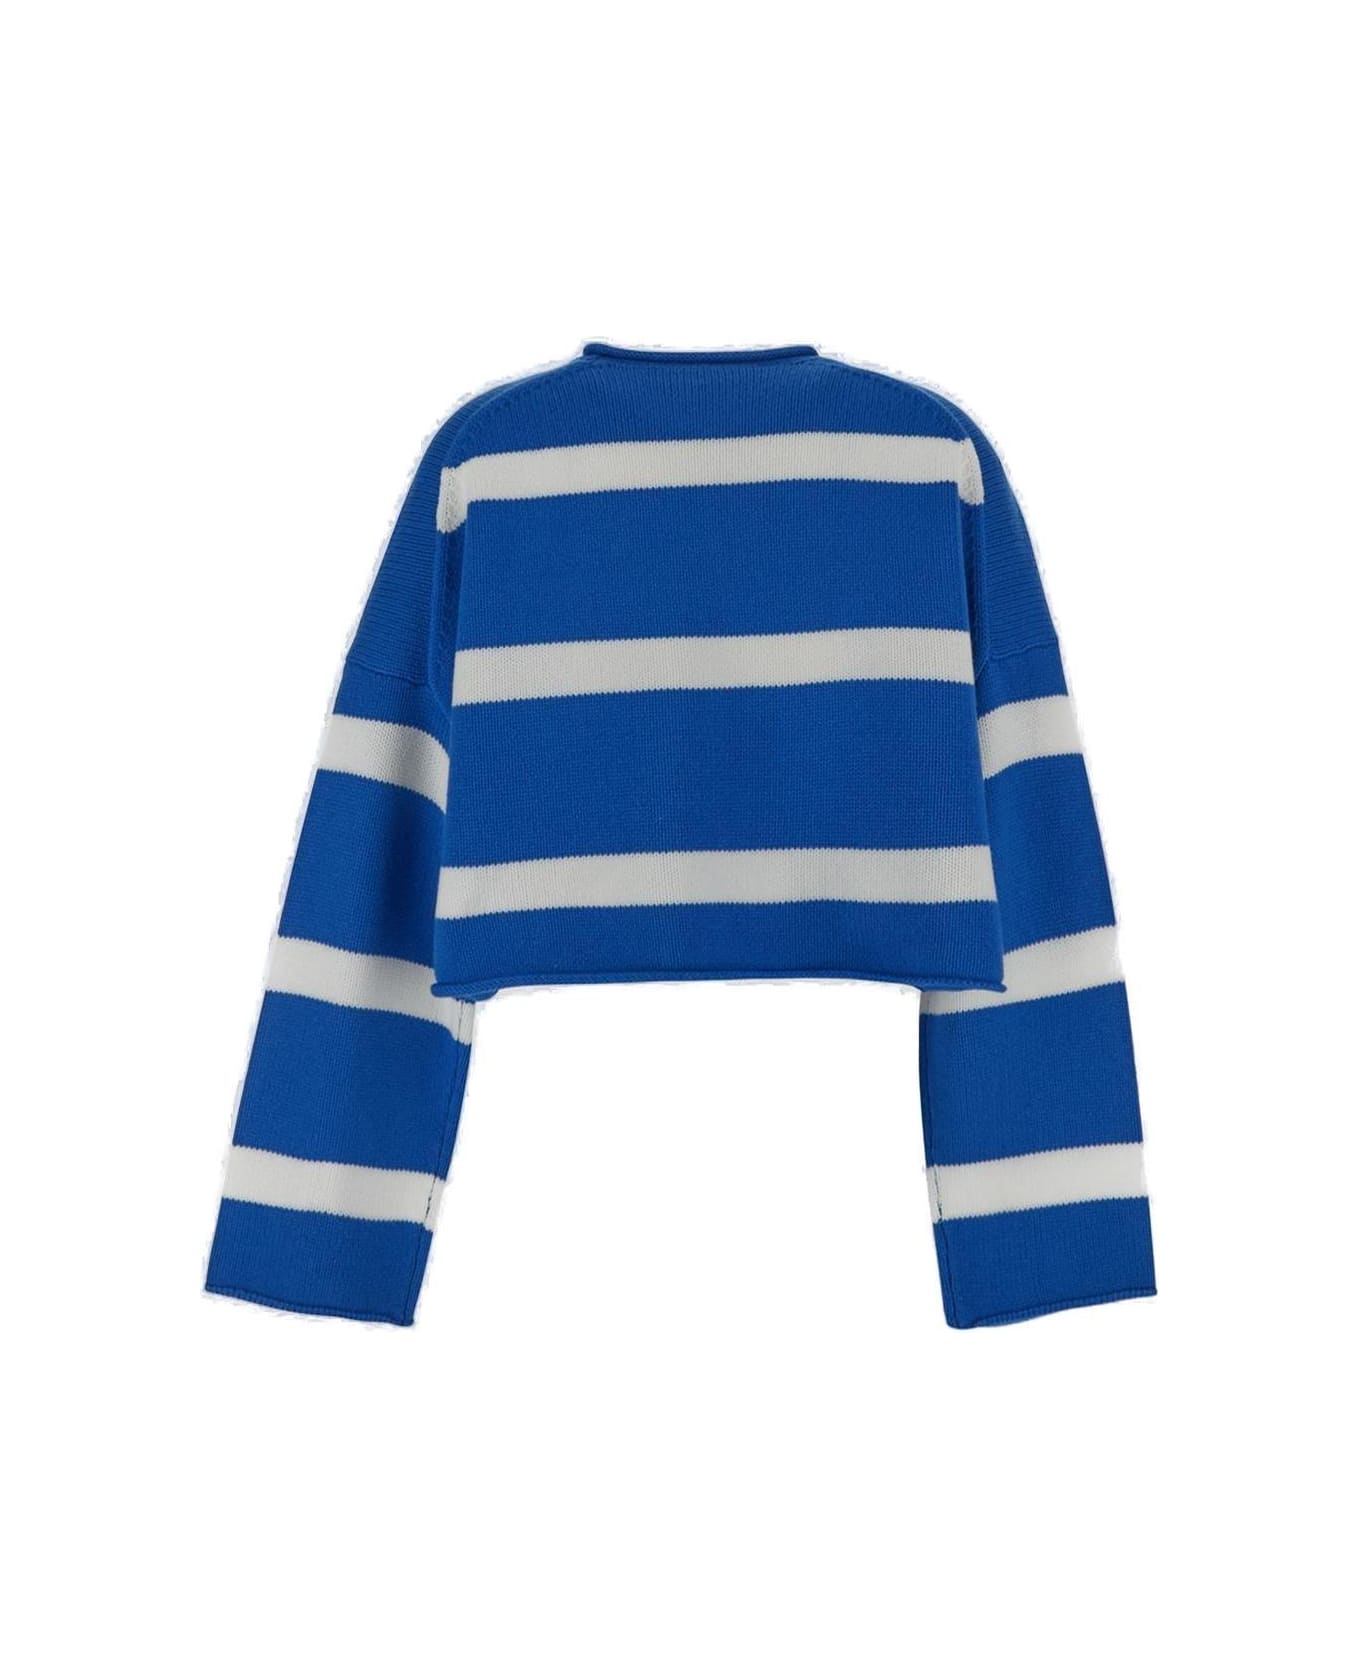 Alexander Wang Logo Embroidered Striped Sweater - GREY